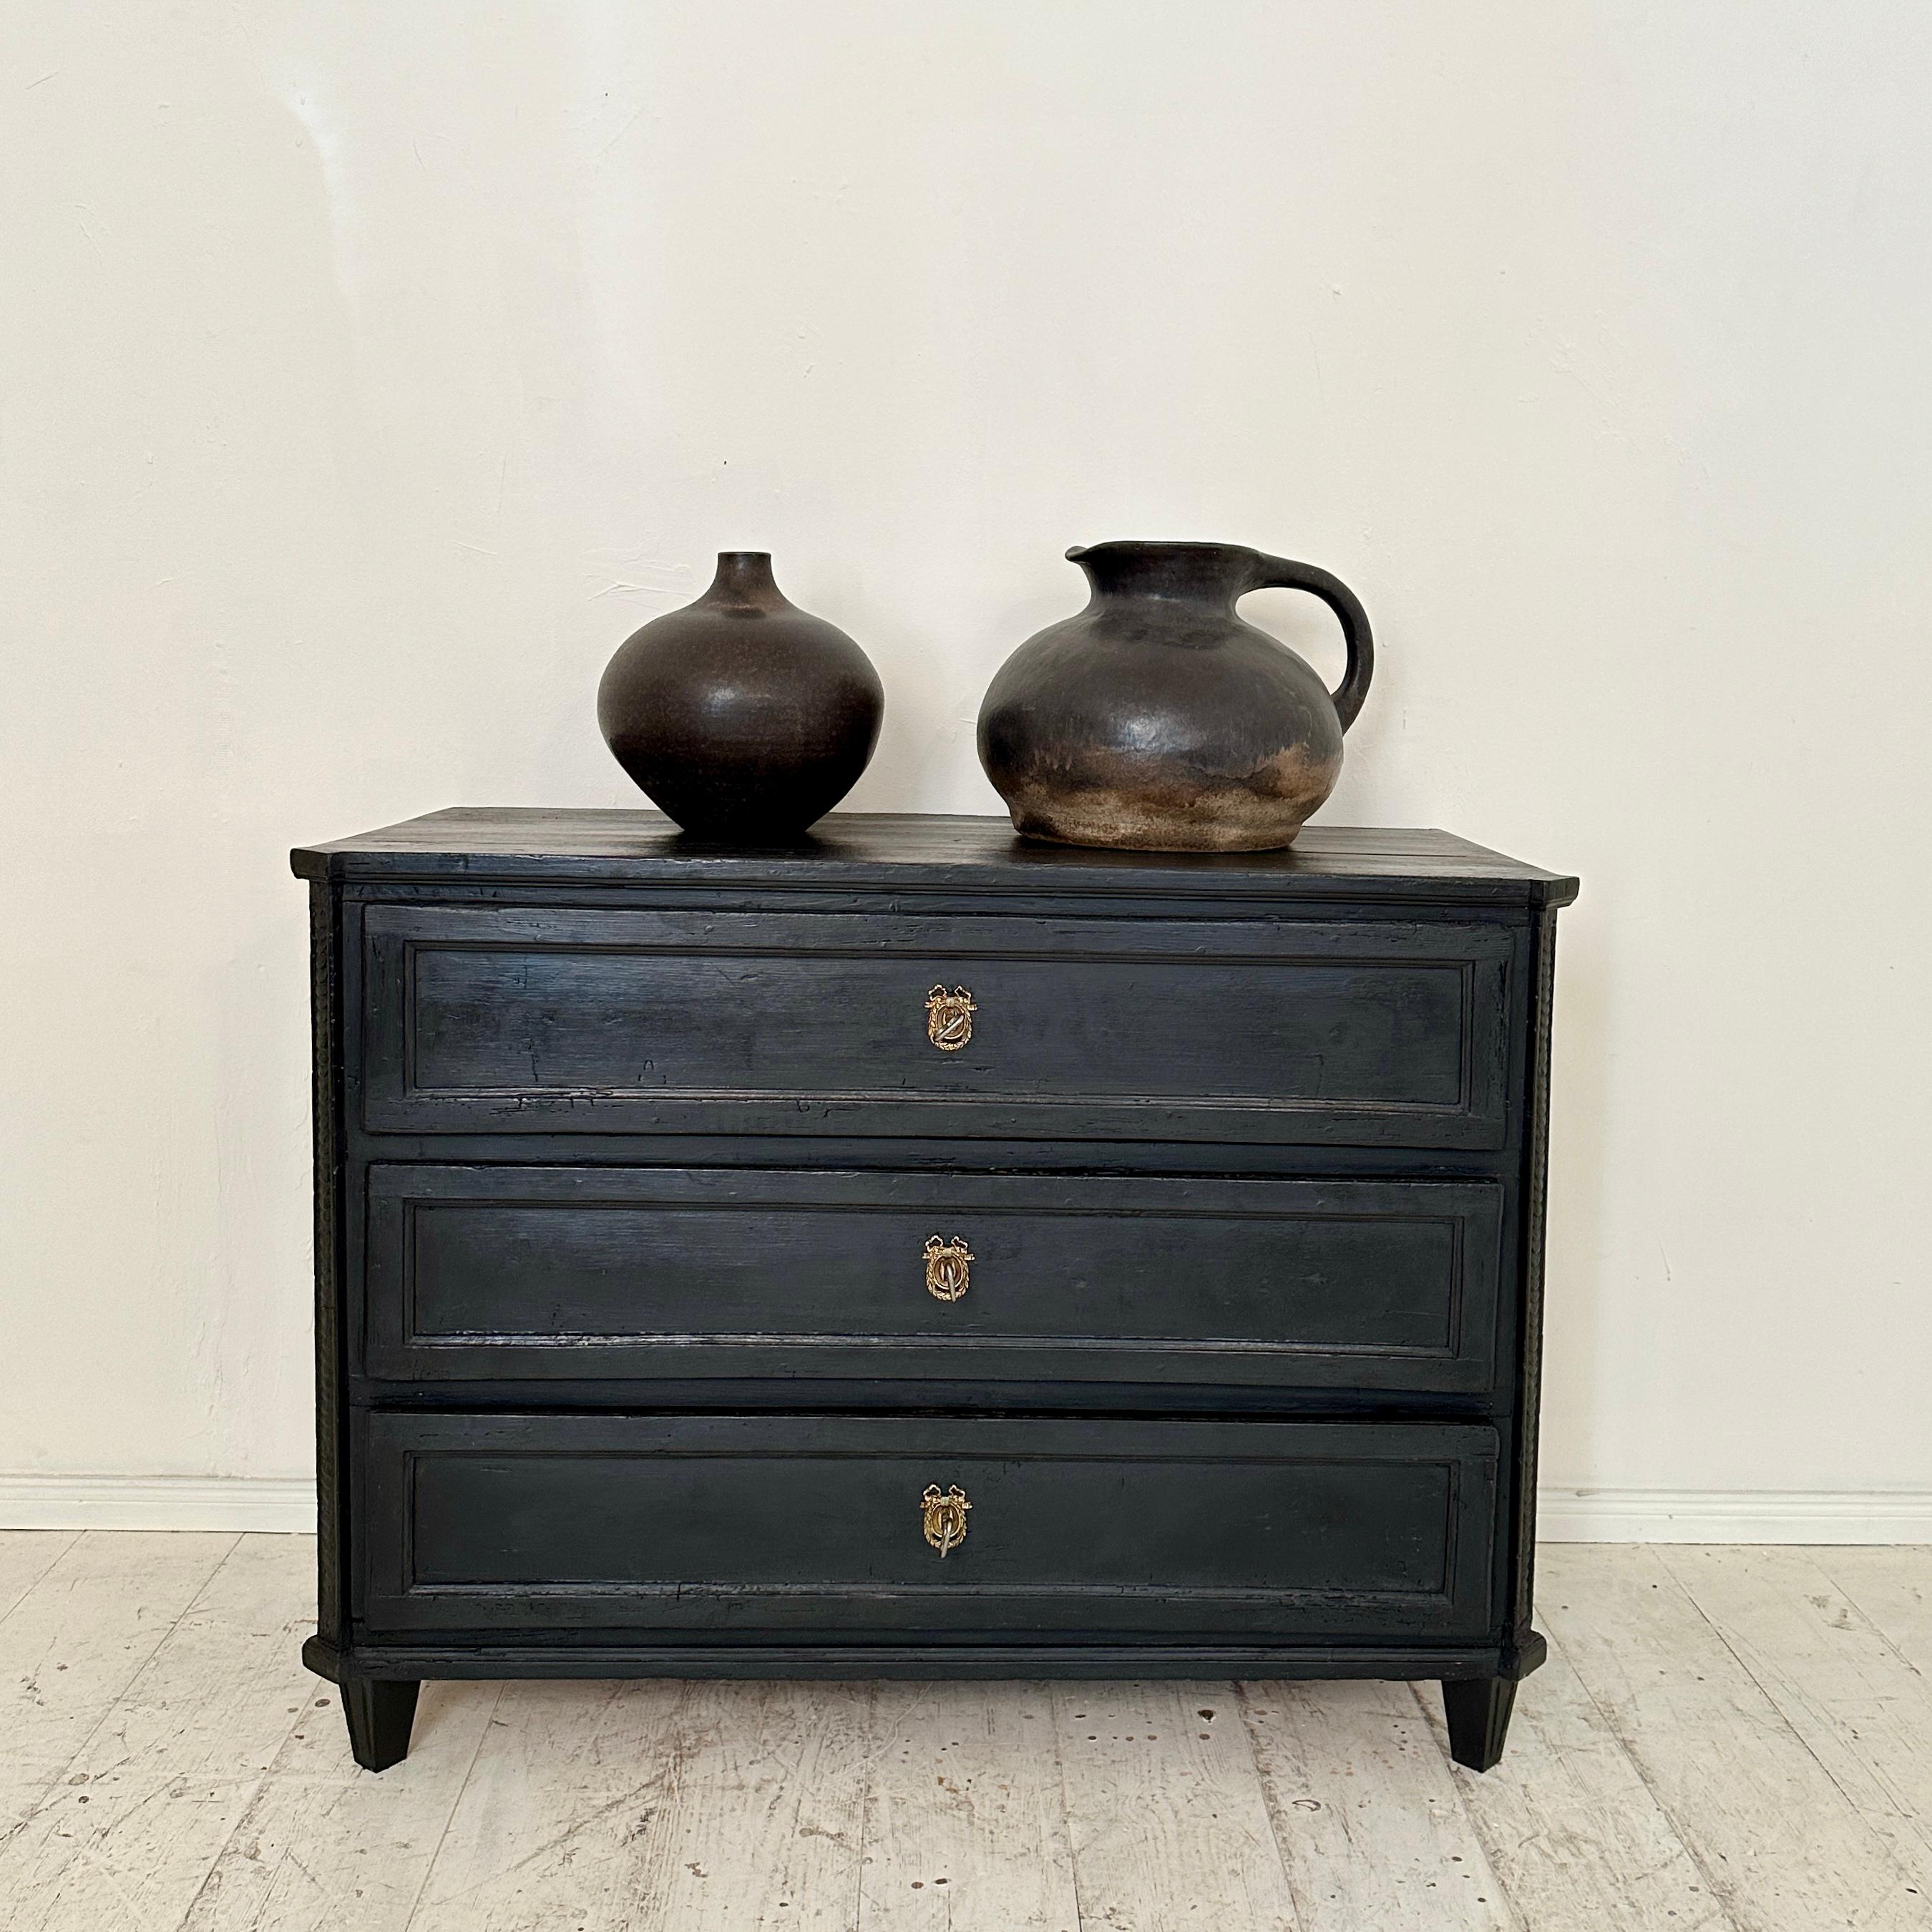 Early 19th Century Black Empire Chest of Drawers with 3 Drawers, around 1800 For Sale 10